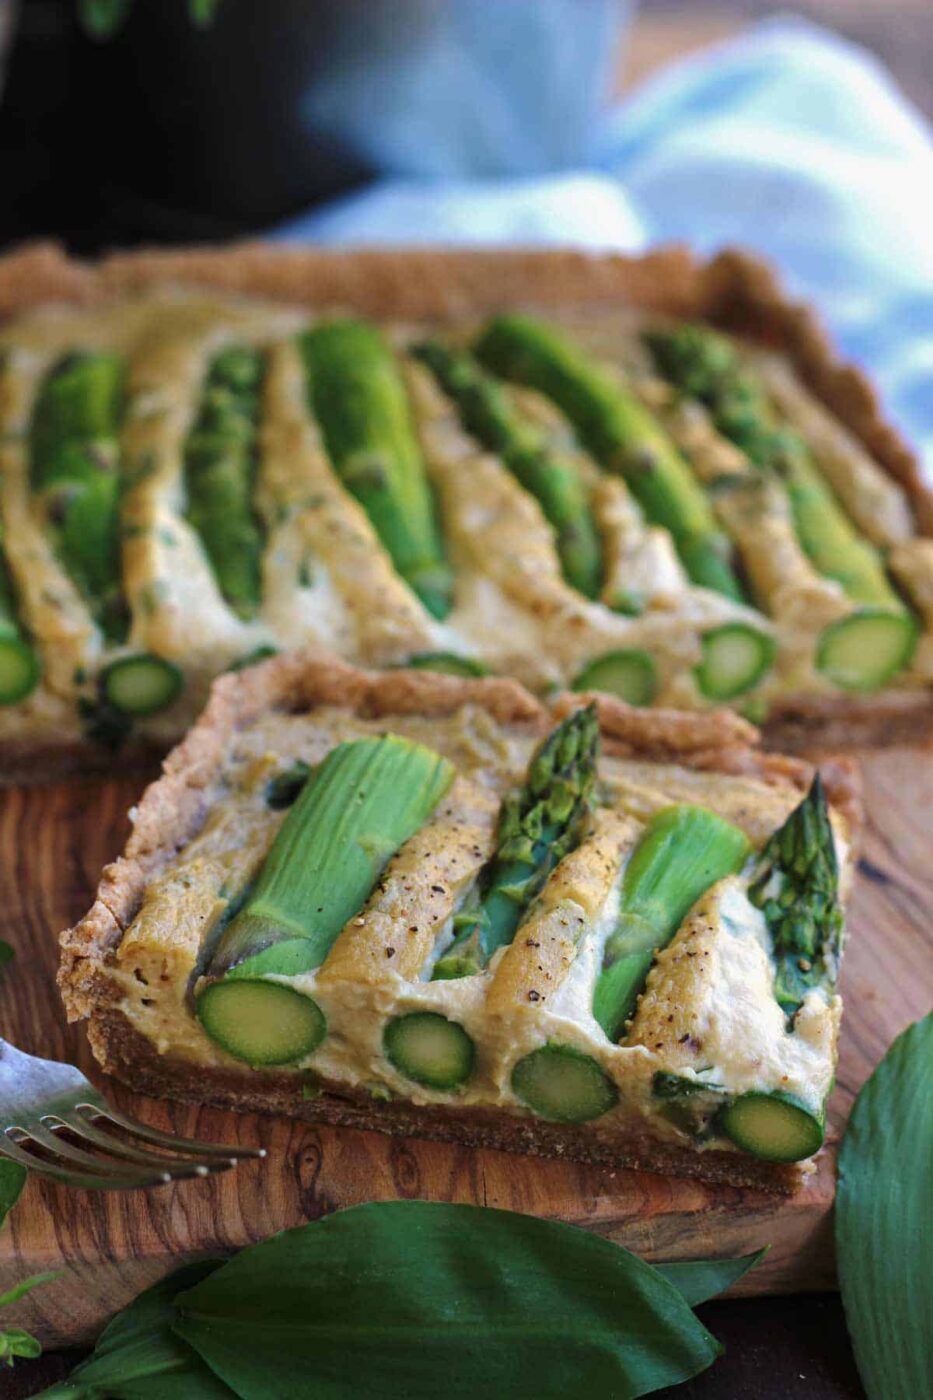 Vegan asparagus quiche + 15 Farmers market recipes to make in April! Delicious, vegetarian, (mostly) healthy spring recipes made with fresh, seasonal produce from your local farmers market or CSA bin. Eat local! // Rhubarbarians